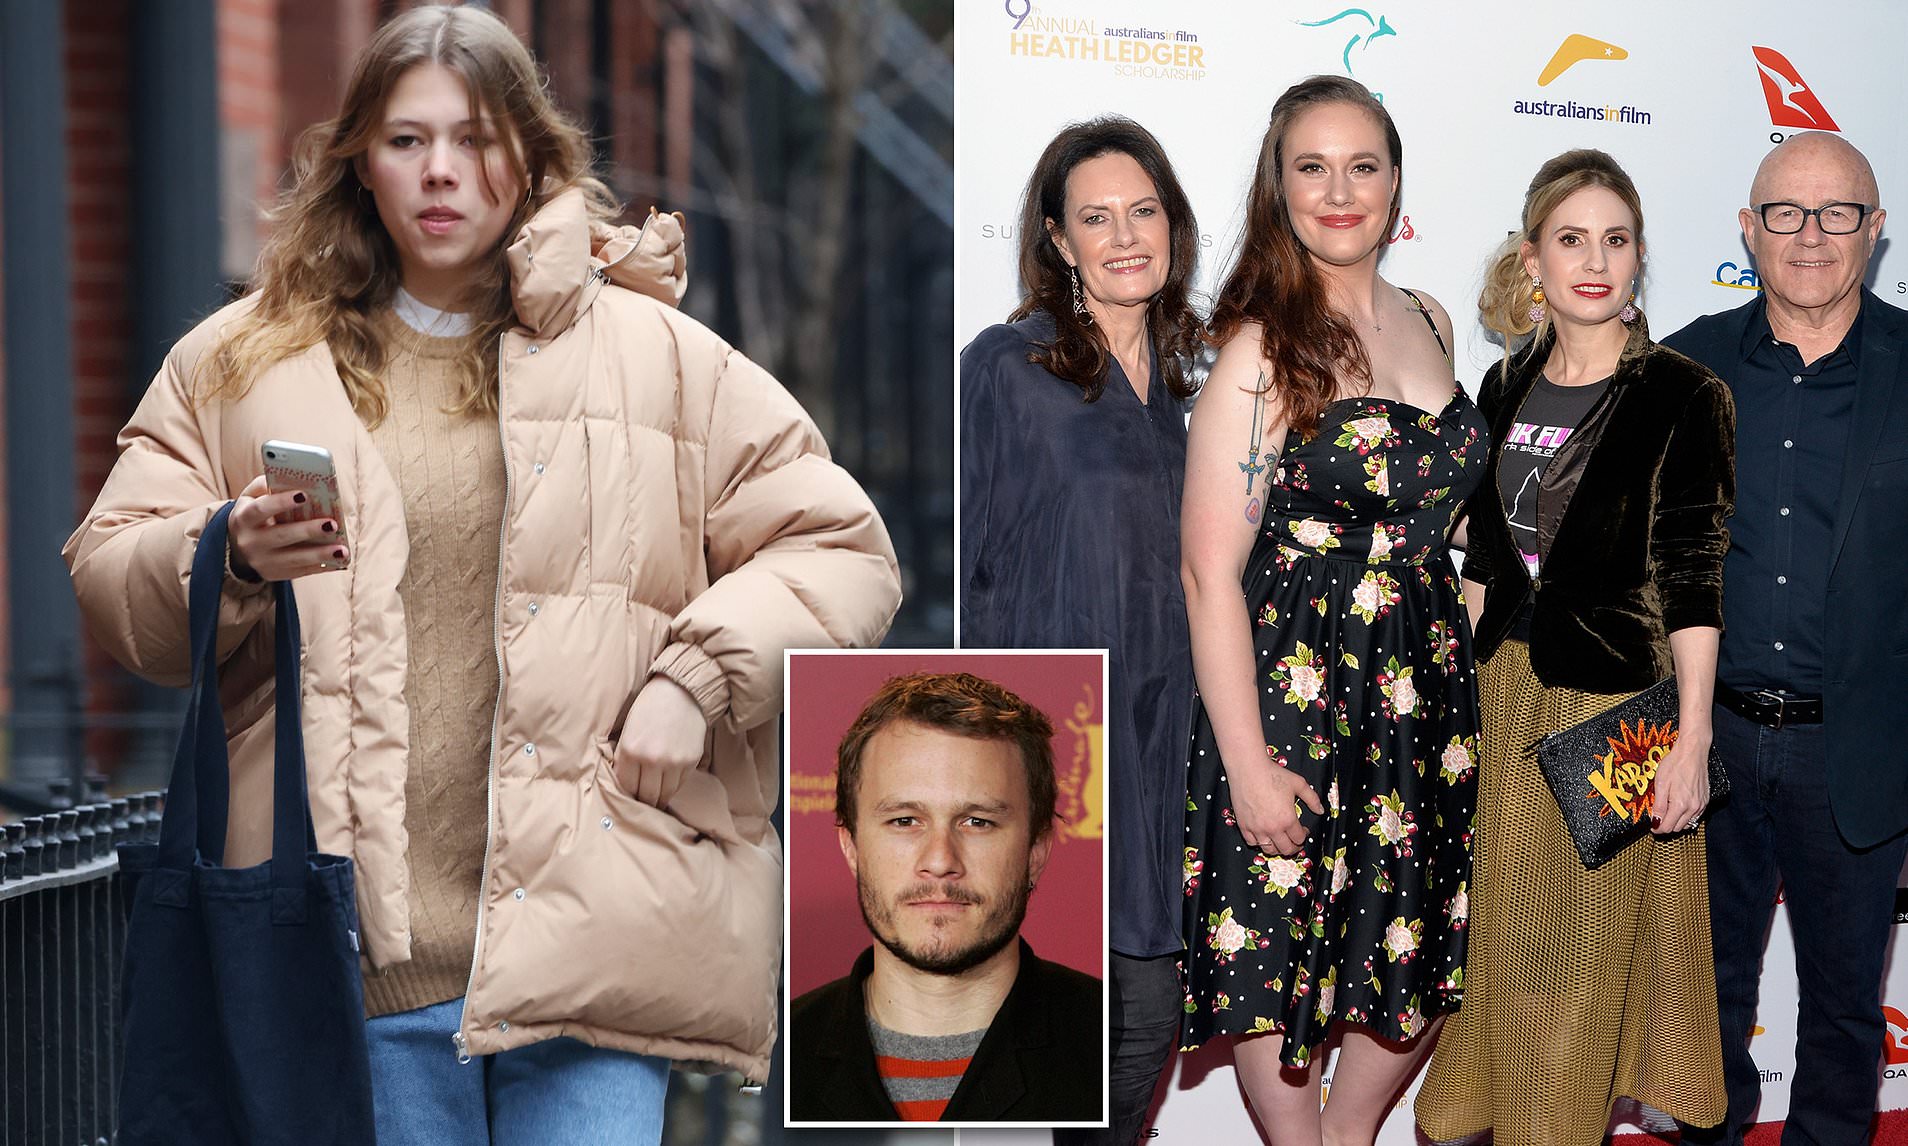 Heath Ledger’s Daughter Matilda Is 17 & Her Late Dad's Mini-Me in Rare New Photos | cointime.fun